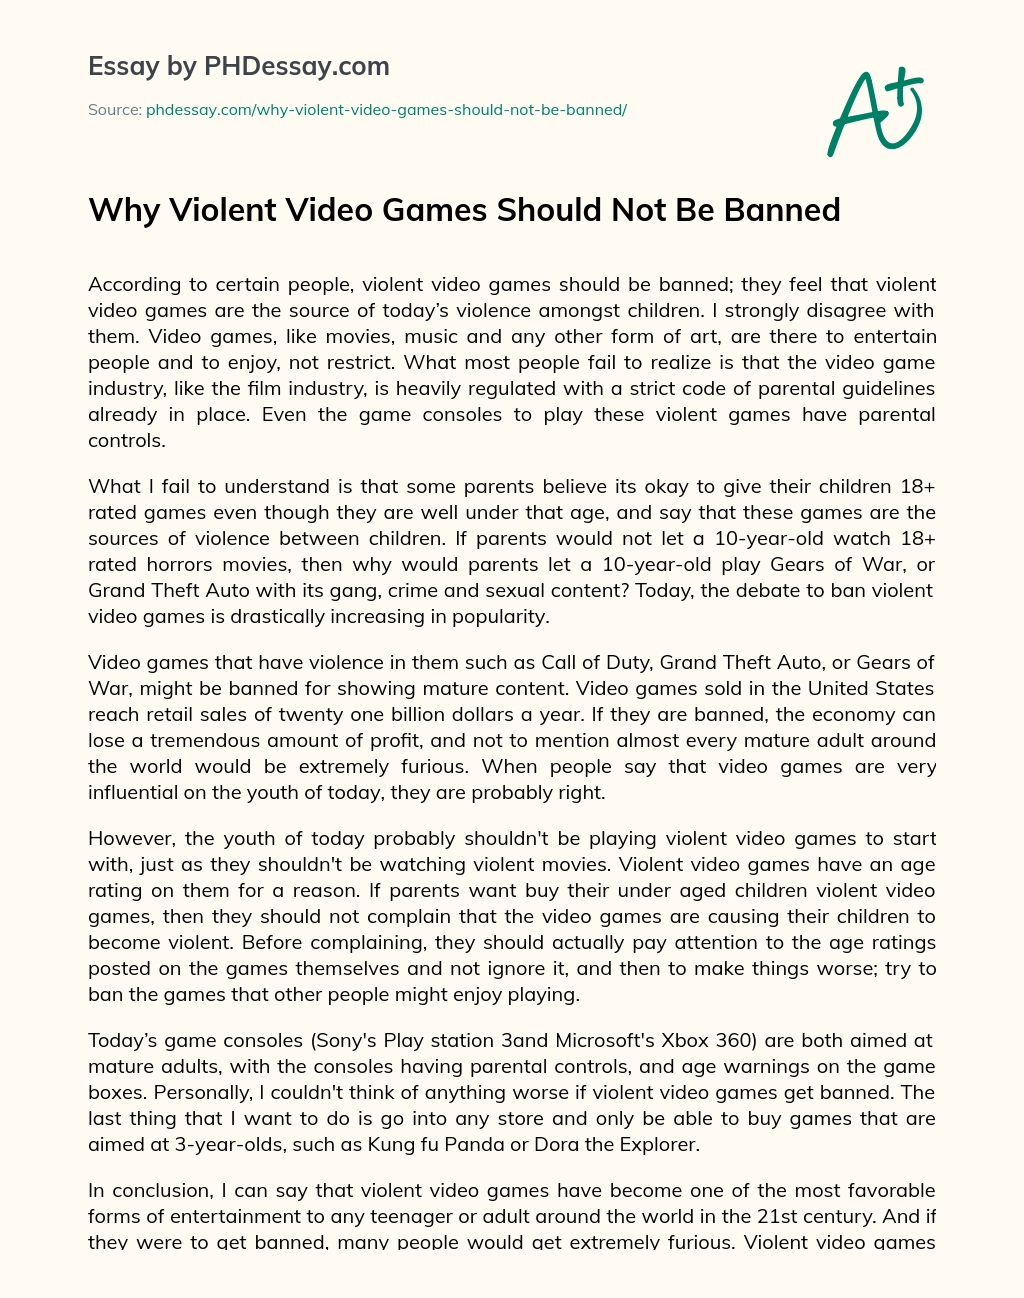 online games should not be banned essay